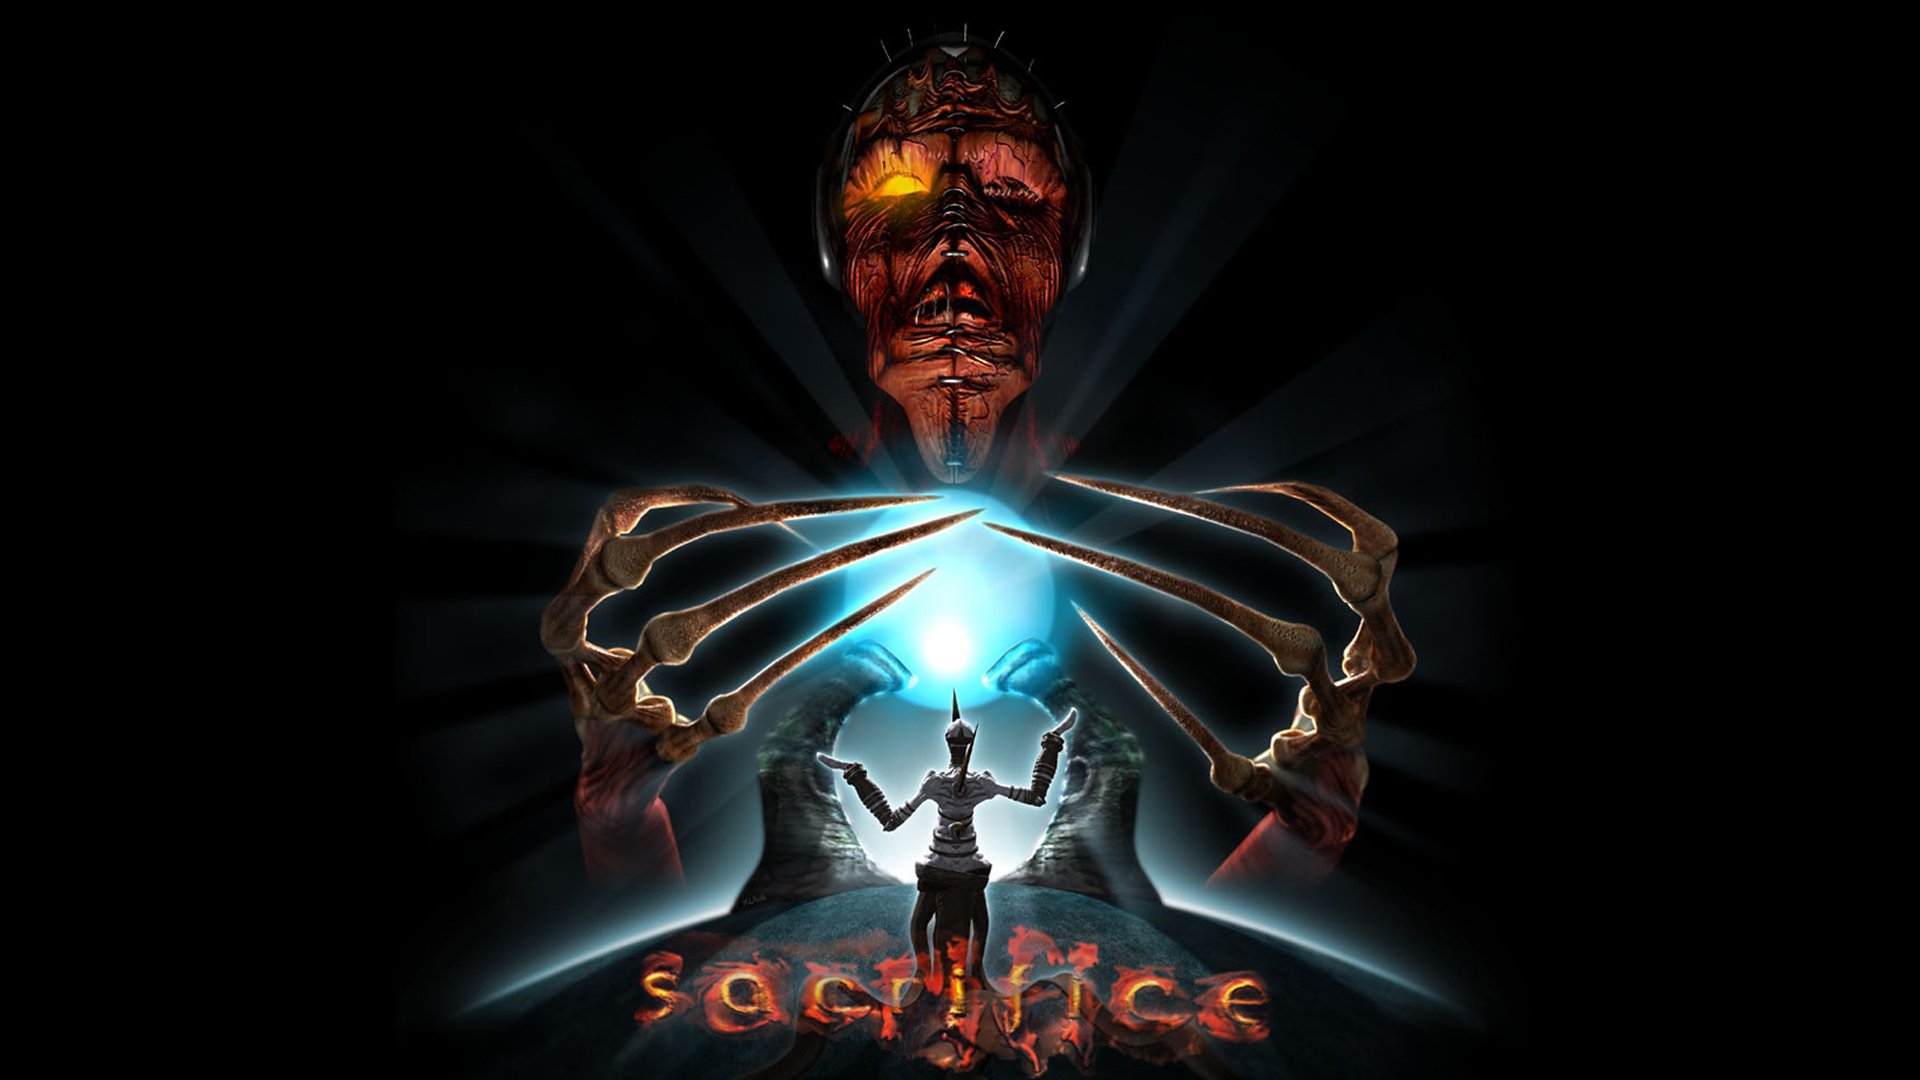 Brand of Sacrifice BLOODY RUNE background by coltonedwards93 on DeviantArt